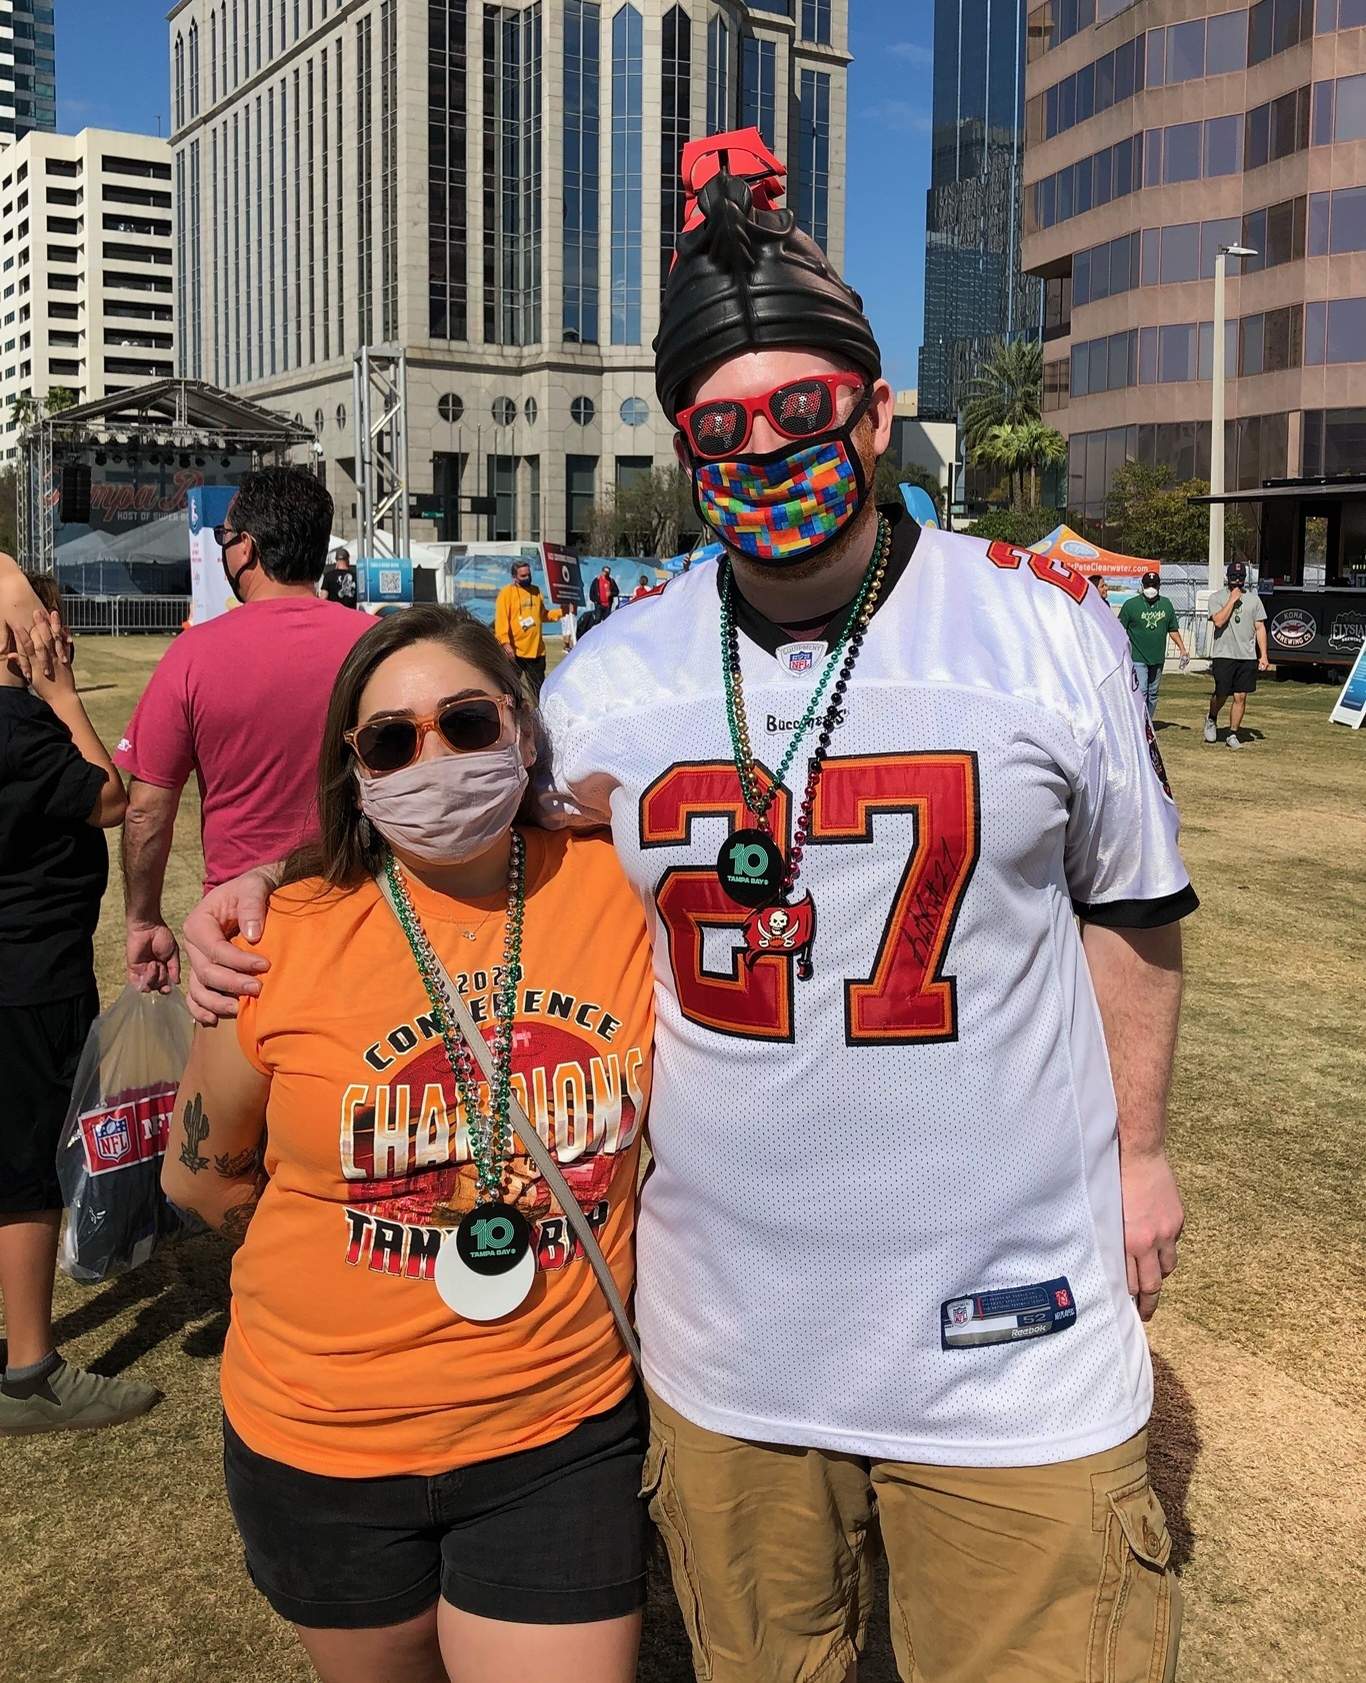 Super party on for fans in Tampa, even if it's more low-key